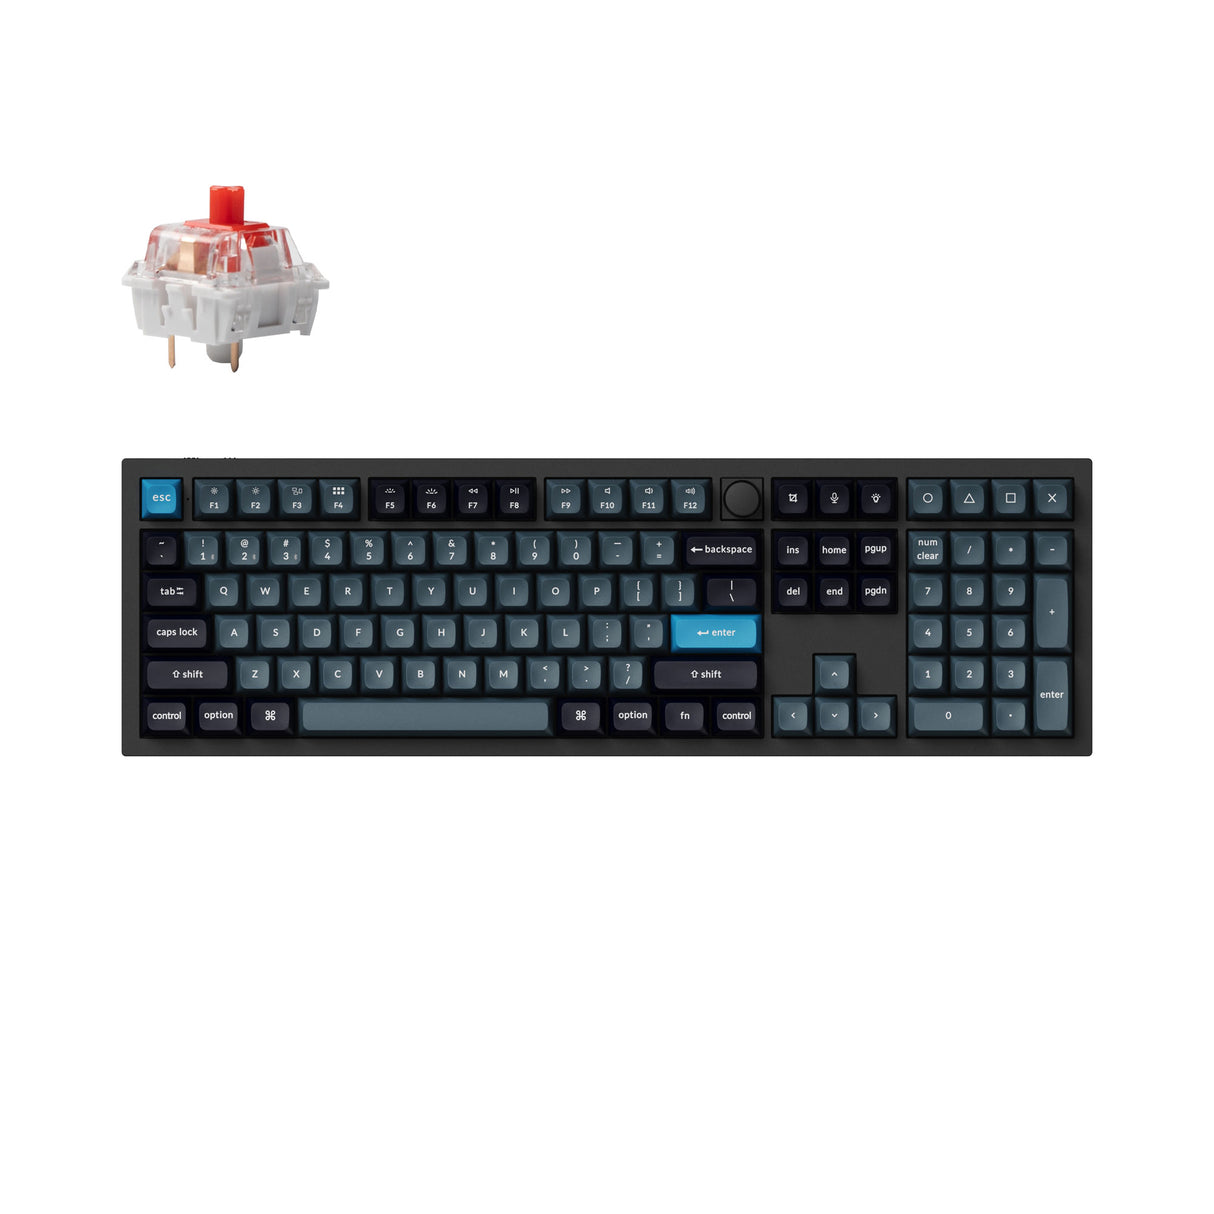 Keychron Q6 Pro QMK/VIA wireless custom mechanical keyboard 100 percent layout full aluminum black frame for Mac WIndows Linux with RGB backlight and hot-swappable K Pro red